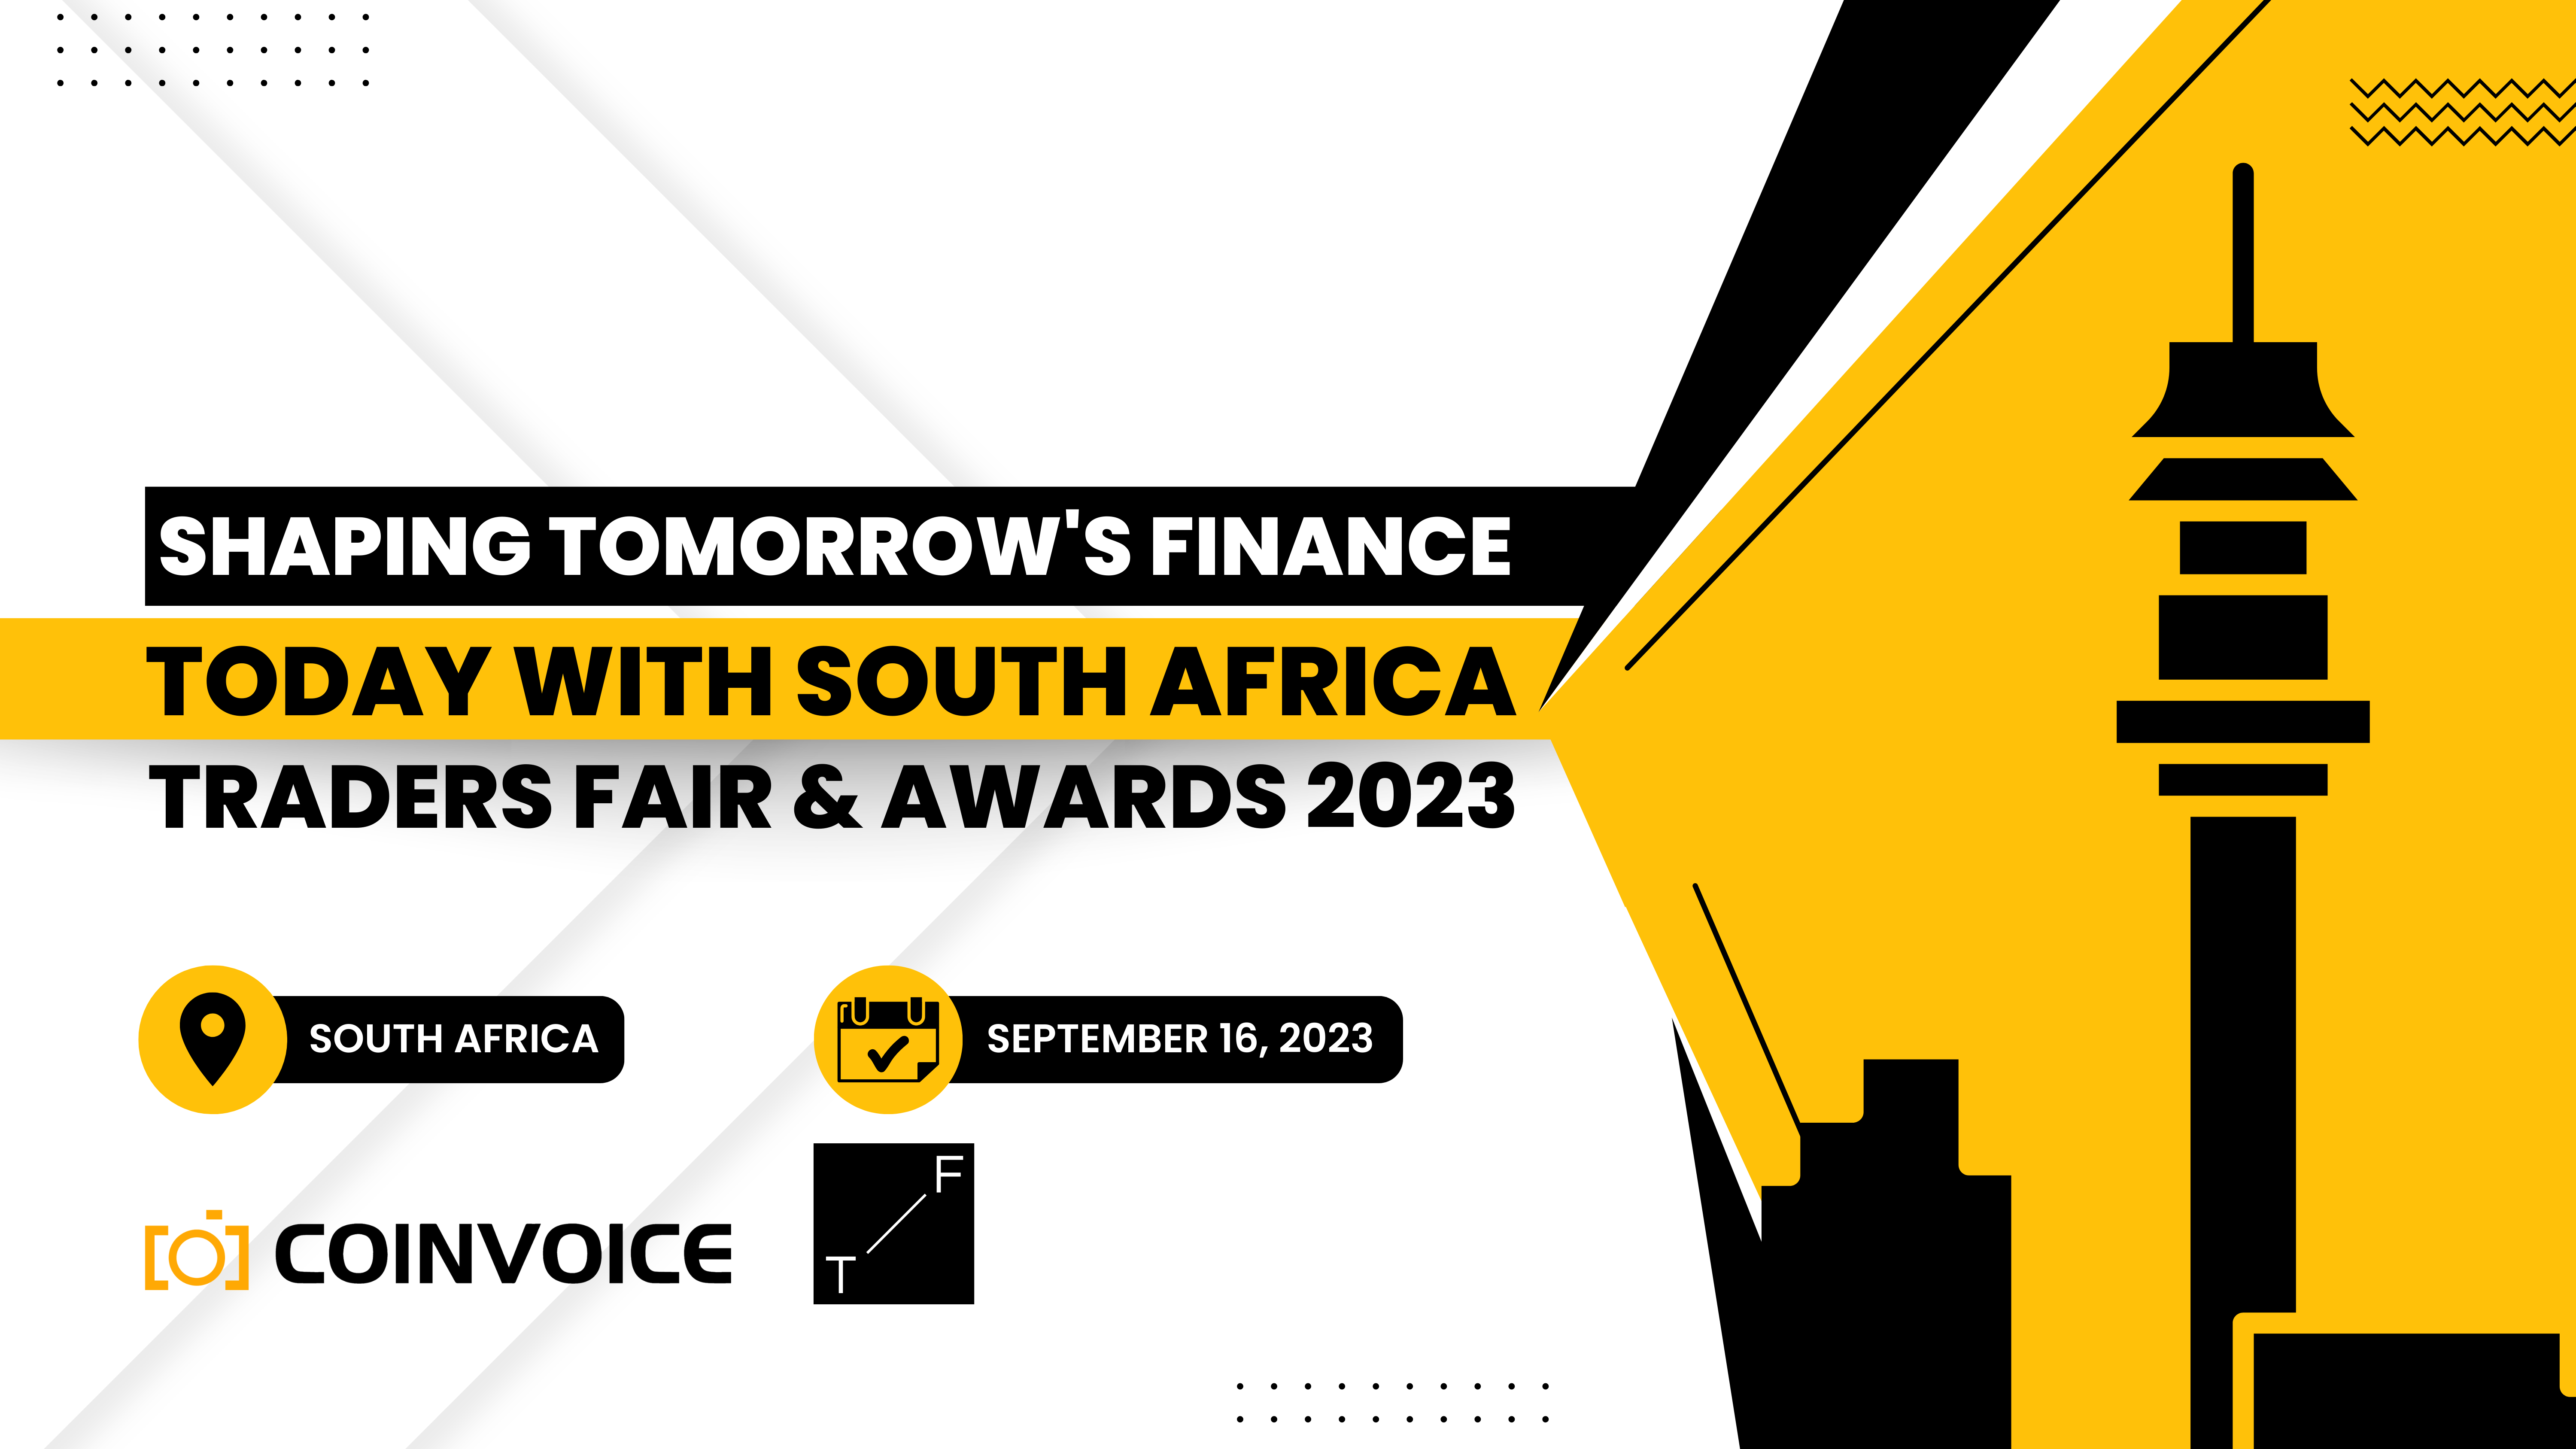 Shaping Tomorrow's Finance Today with South Africa Traders Fair & Awards 2023